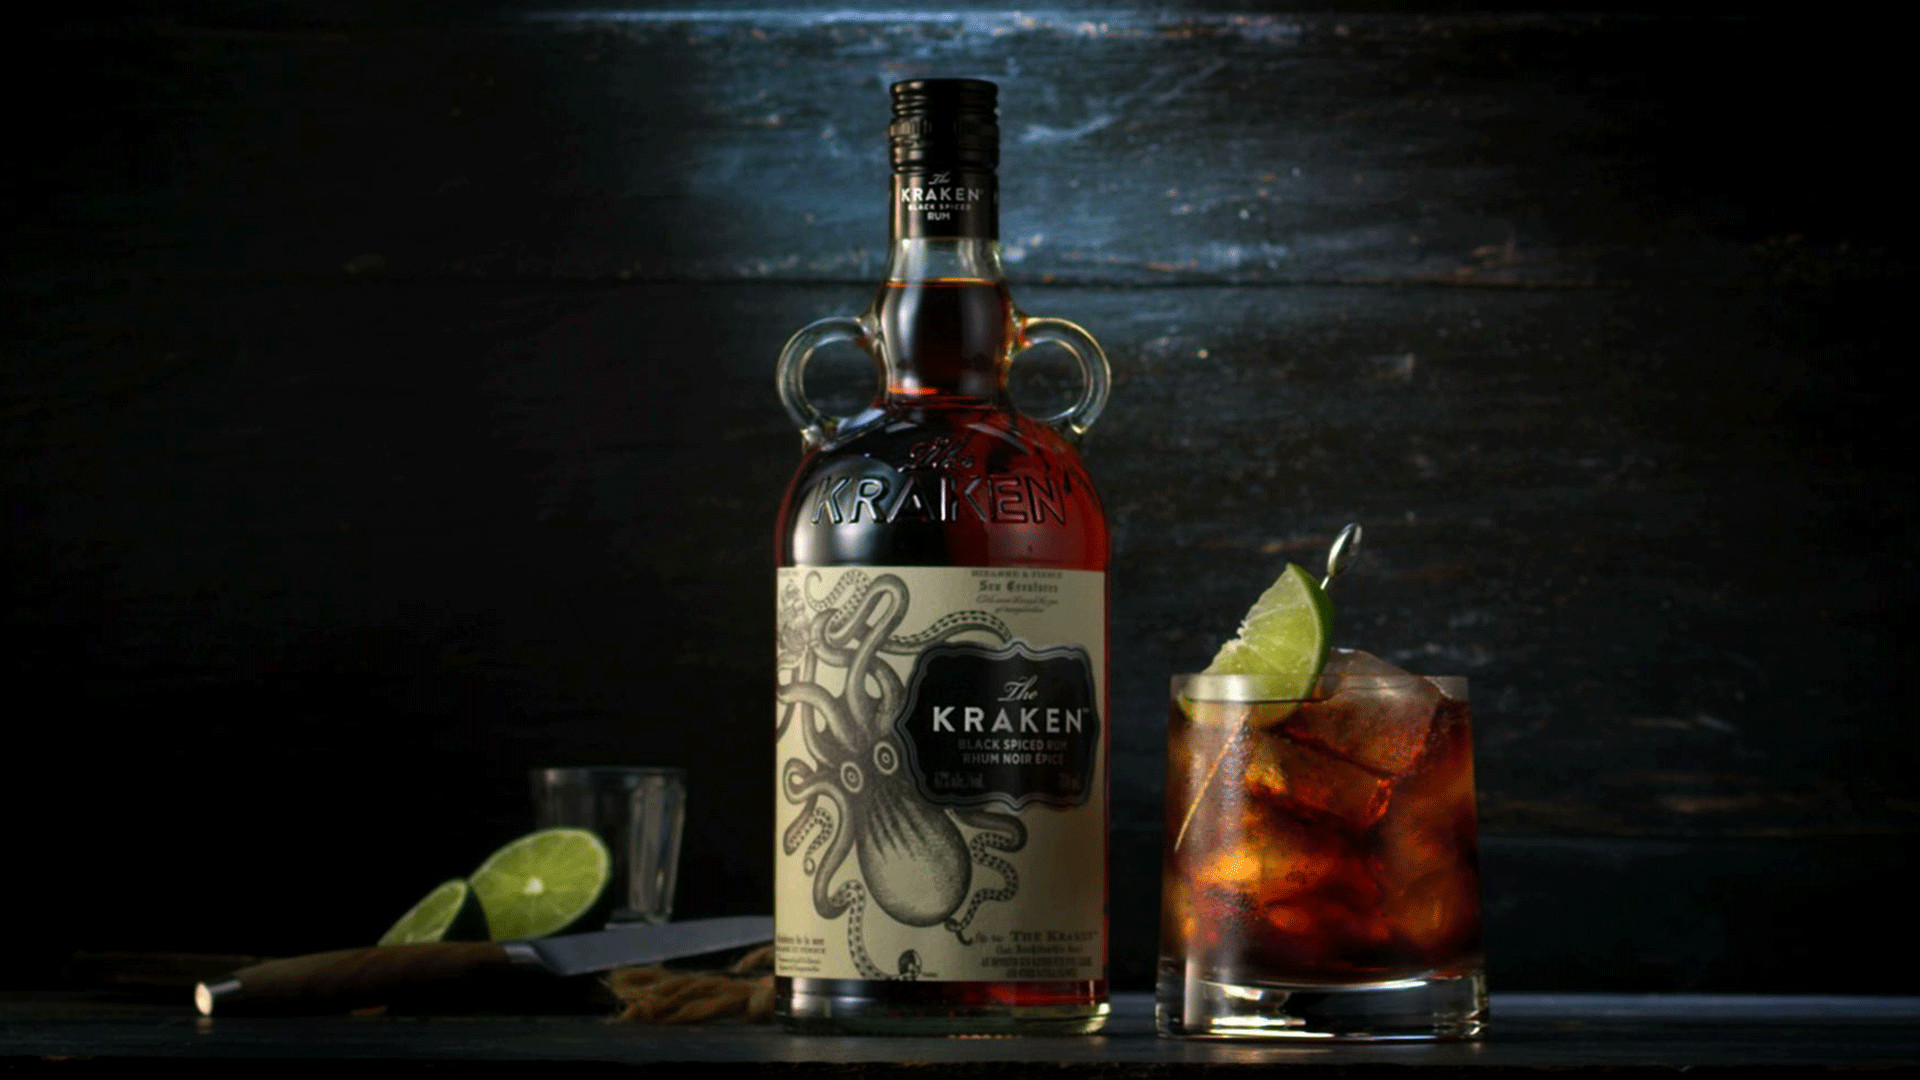 The best three cocktails to make with The Kraken Black Spiced Rum ...